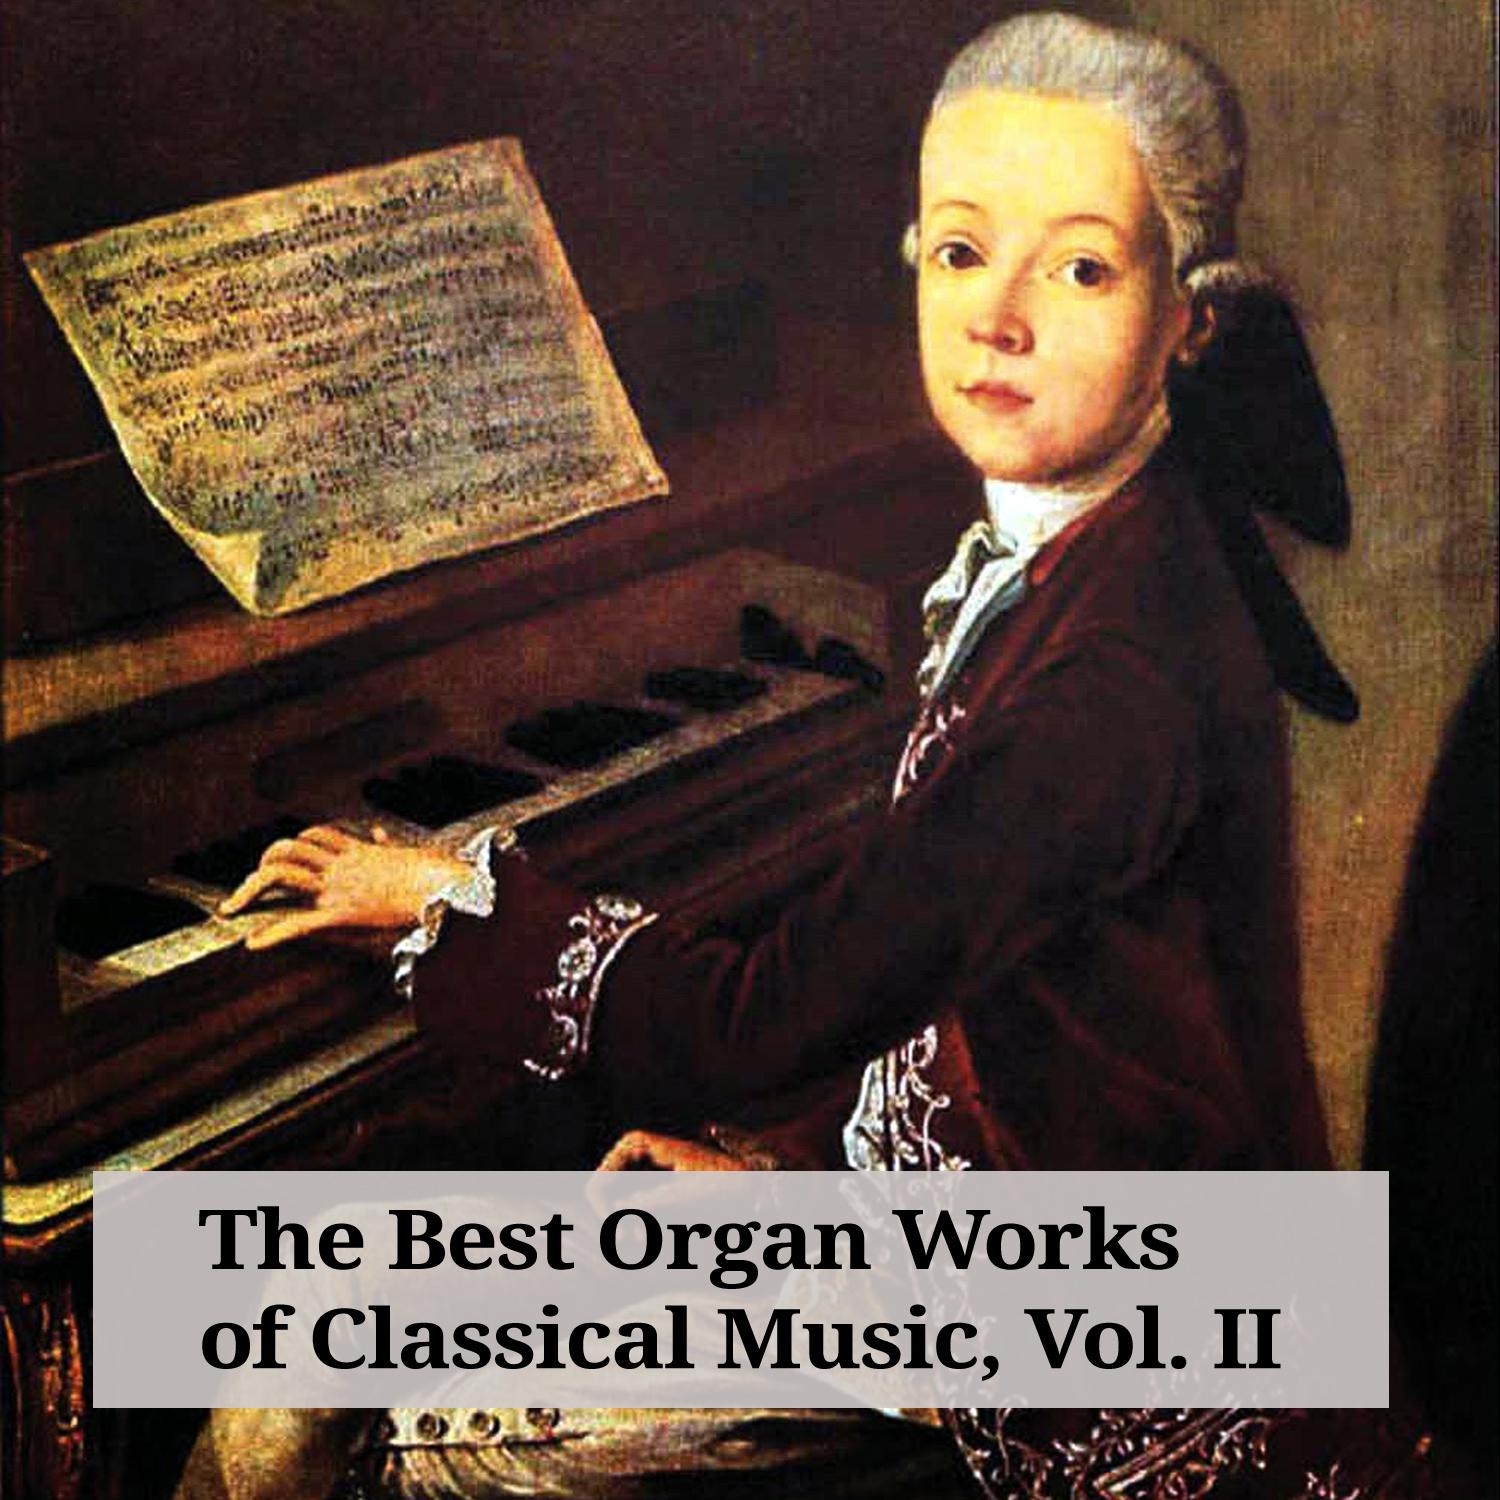 The Best Organ Works of Classical Music, Vol. II